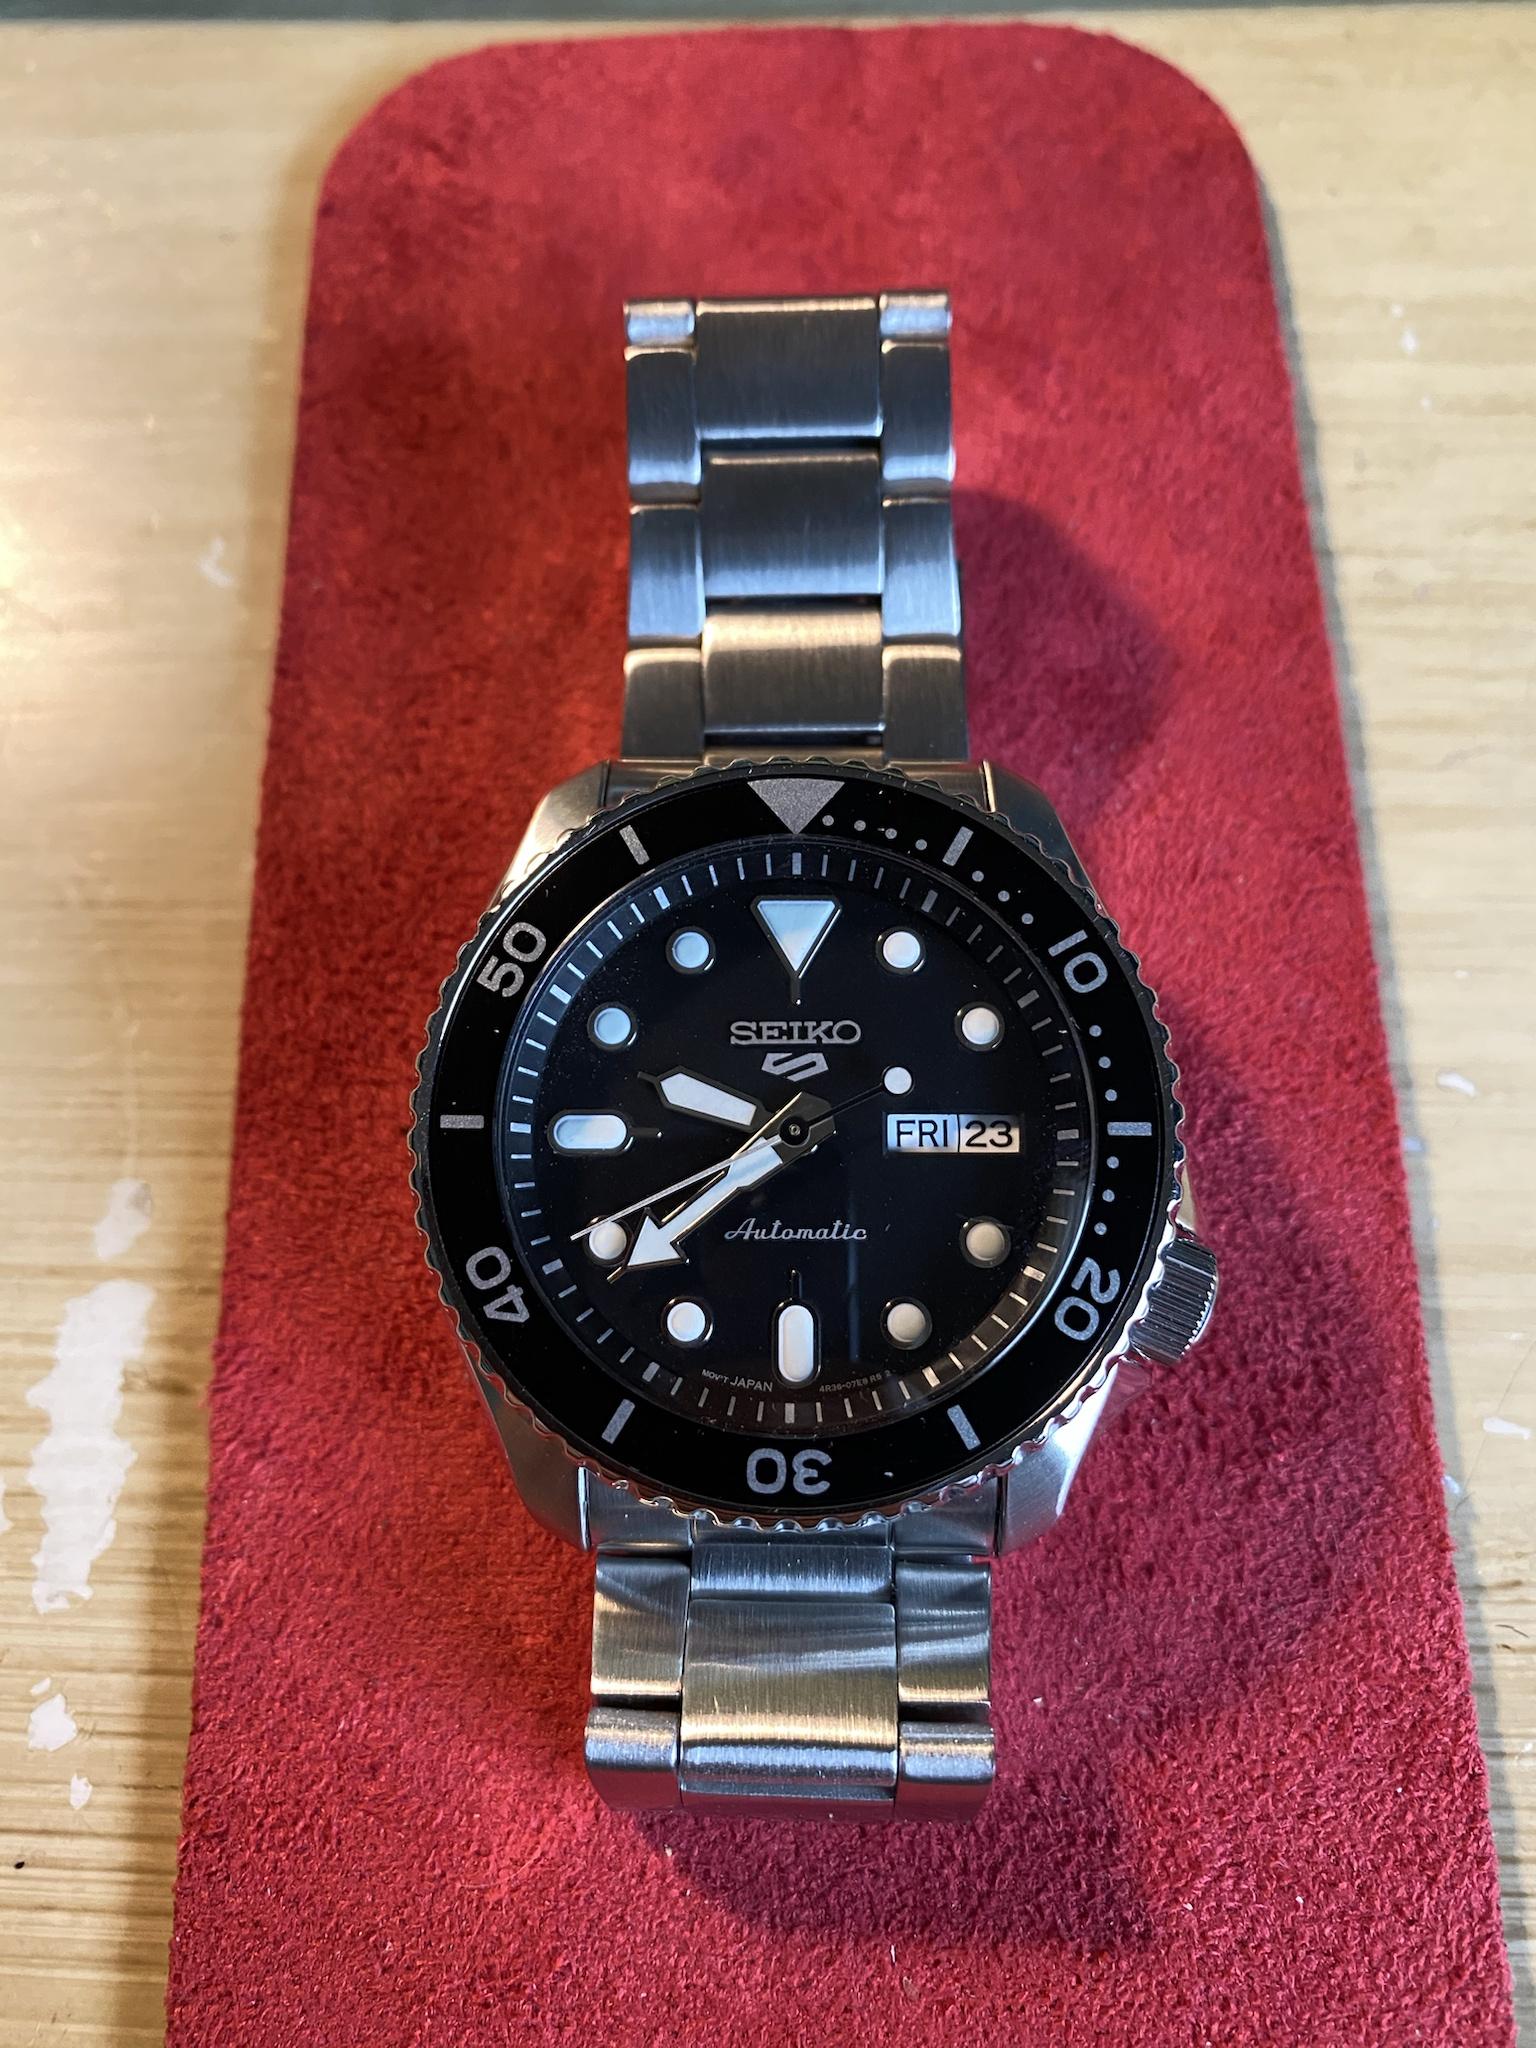 WTS] Seiko SRPD55 with Sapphire Crystal NEW IN BOX $200 | WatchCharts